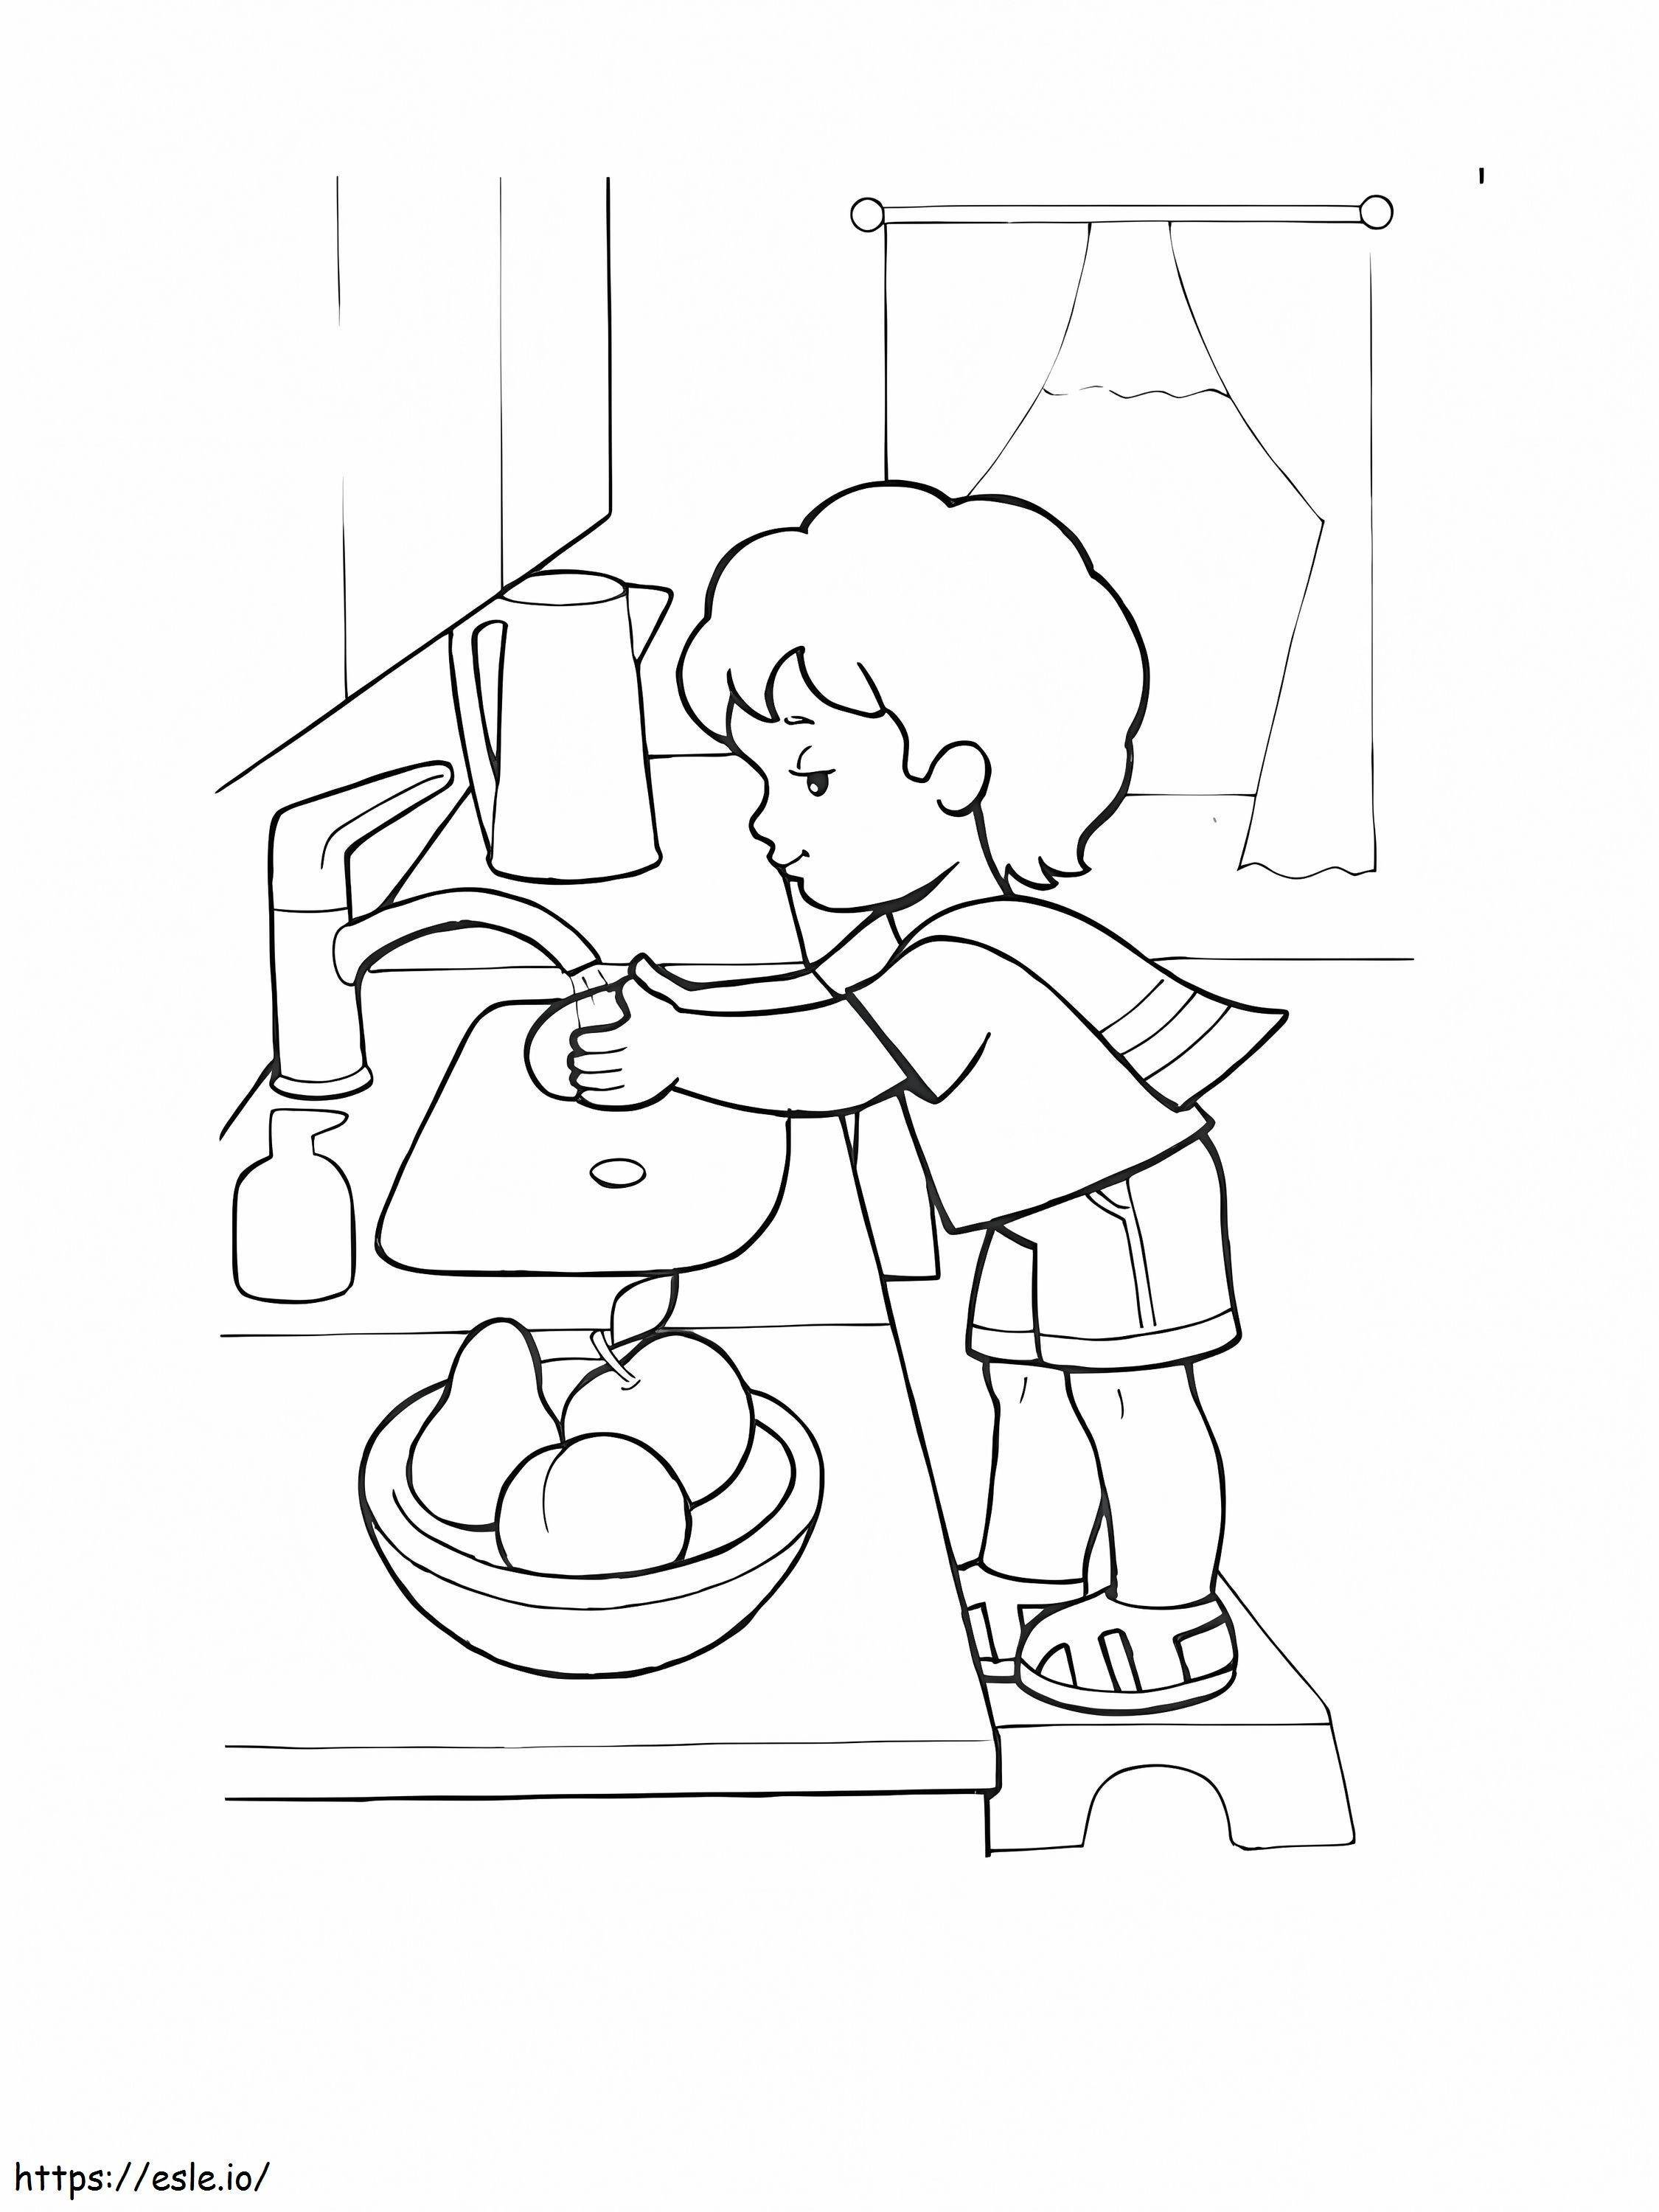 Washing Hands For Good Hygiene coloring page